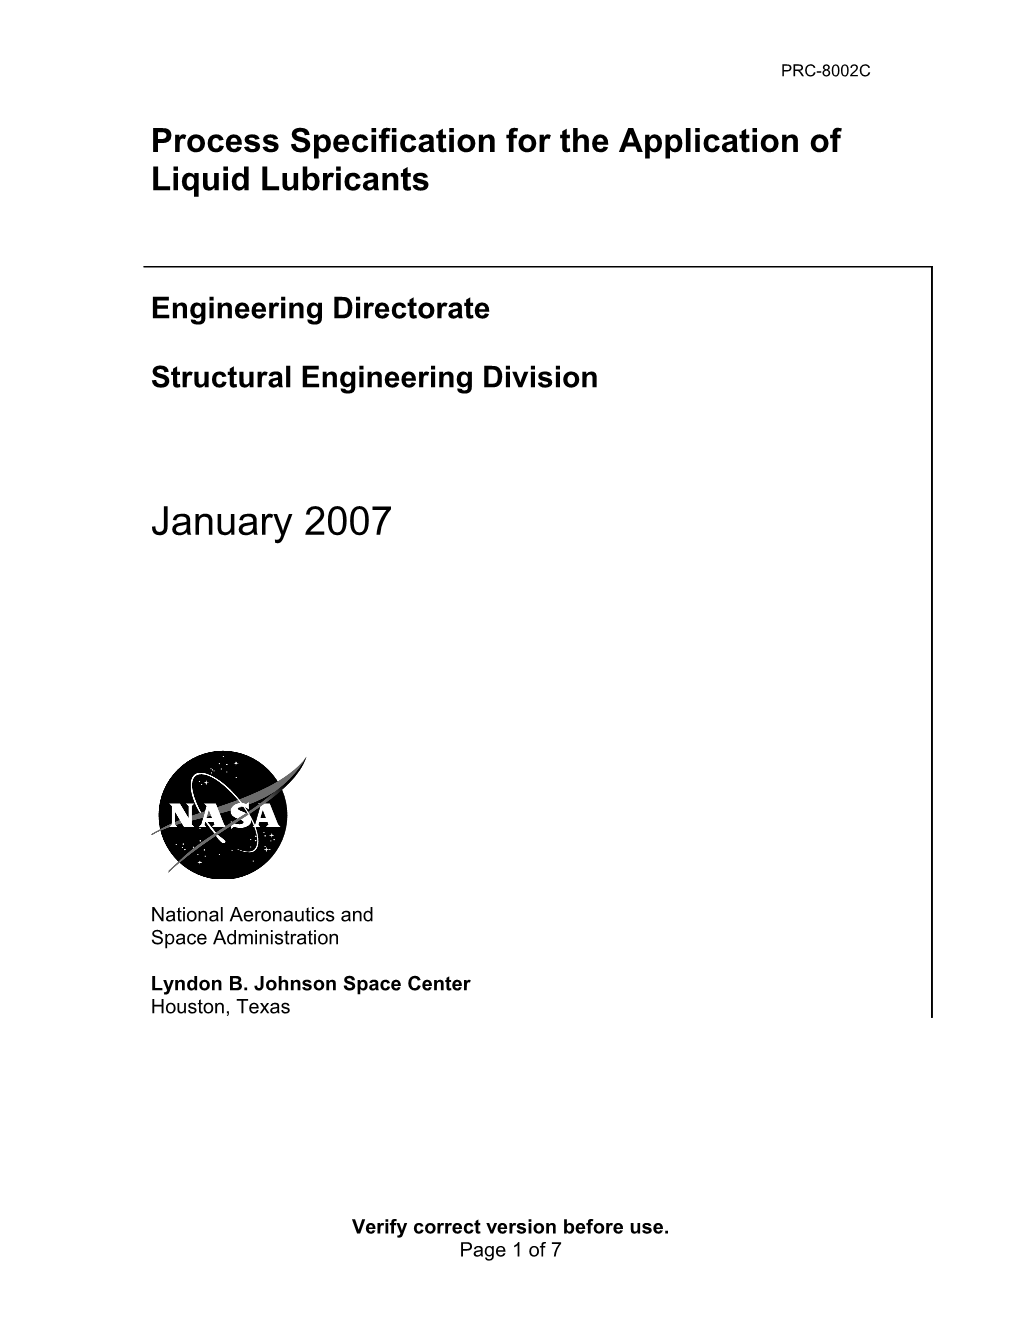 Process Specification for the Application of Liquid Lubricants